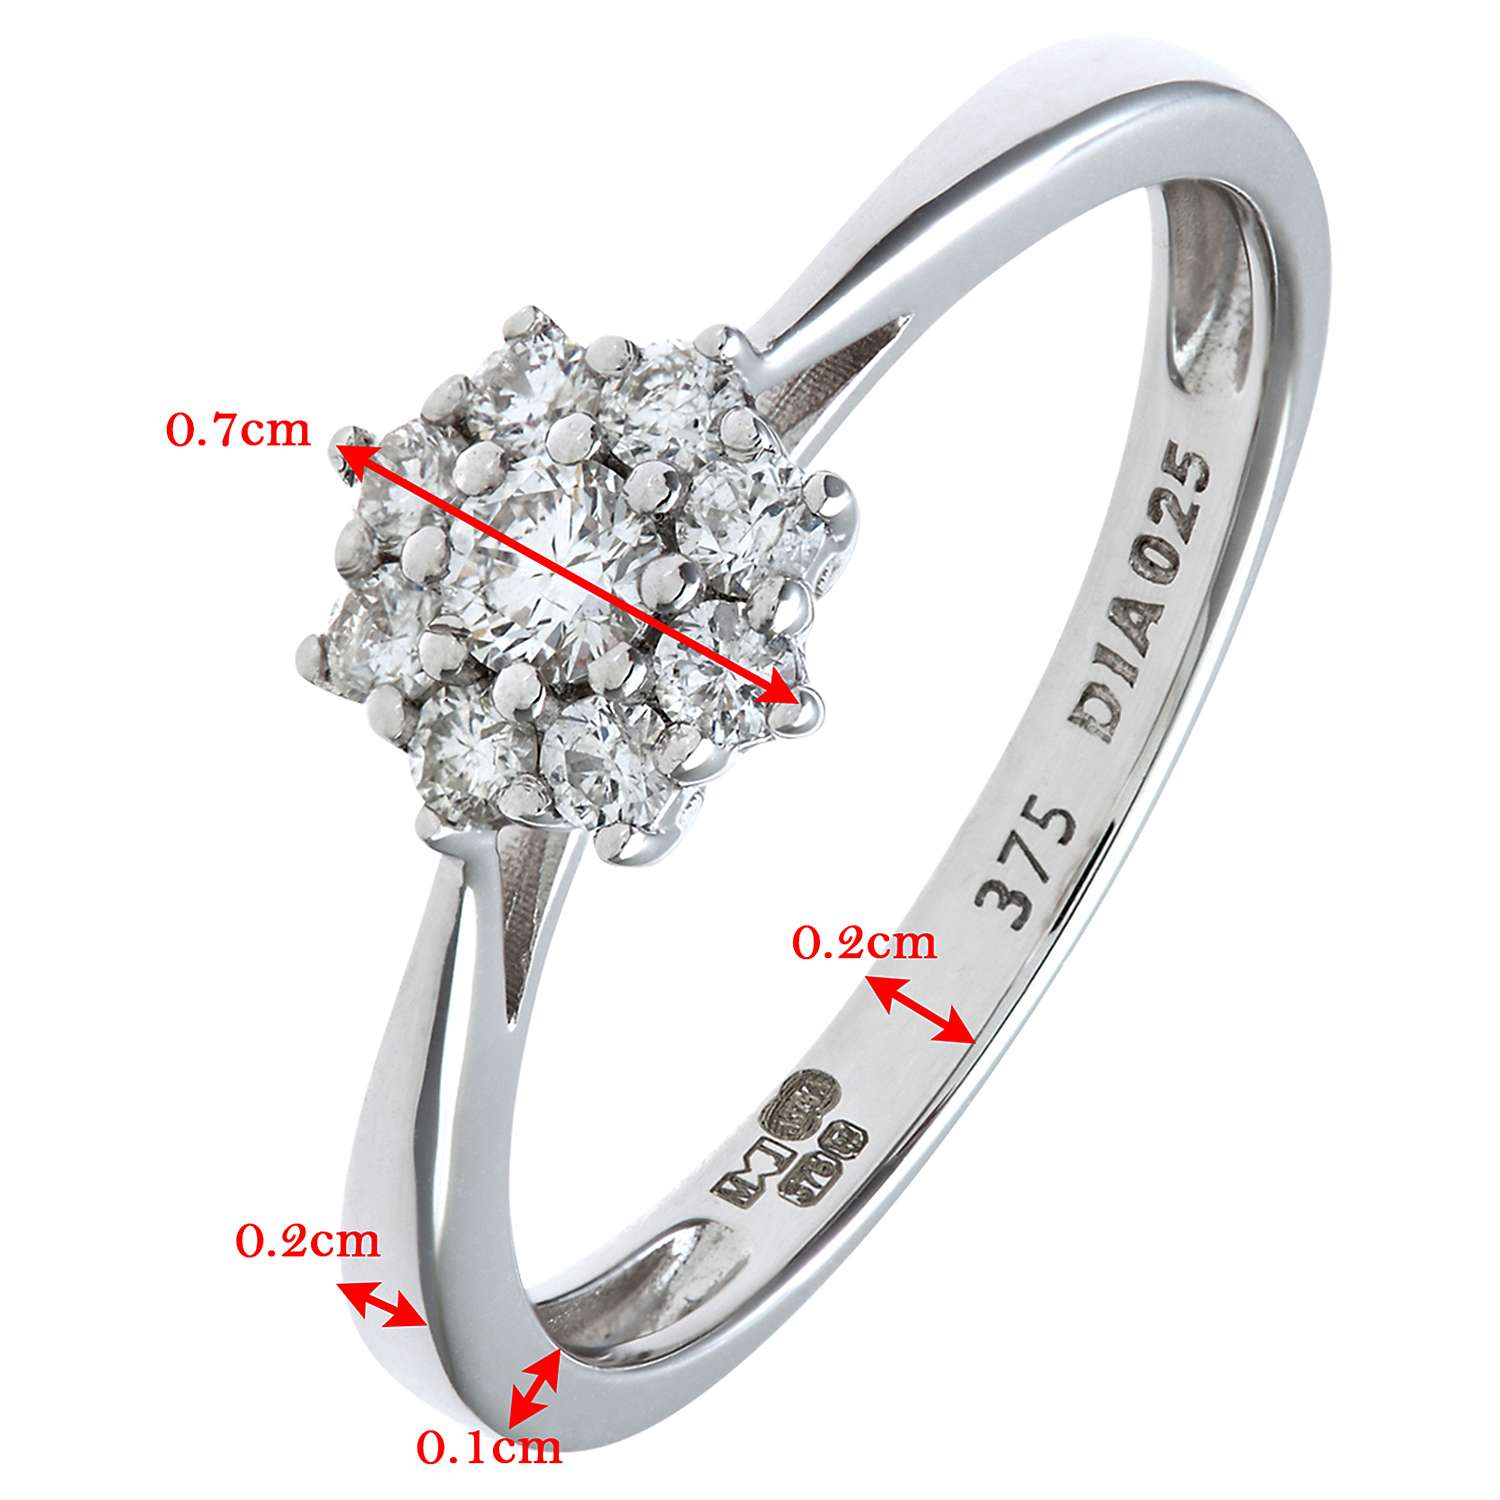 Buy Mogul 9ct White Gold Cluster Diamond Engagement Ring, 0.25ct Online at johnlewis.com